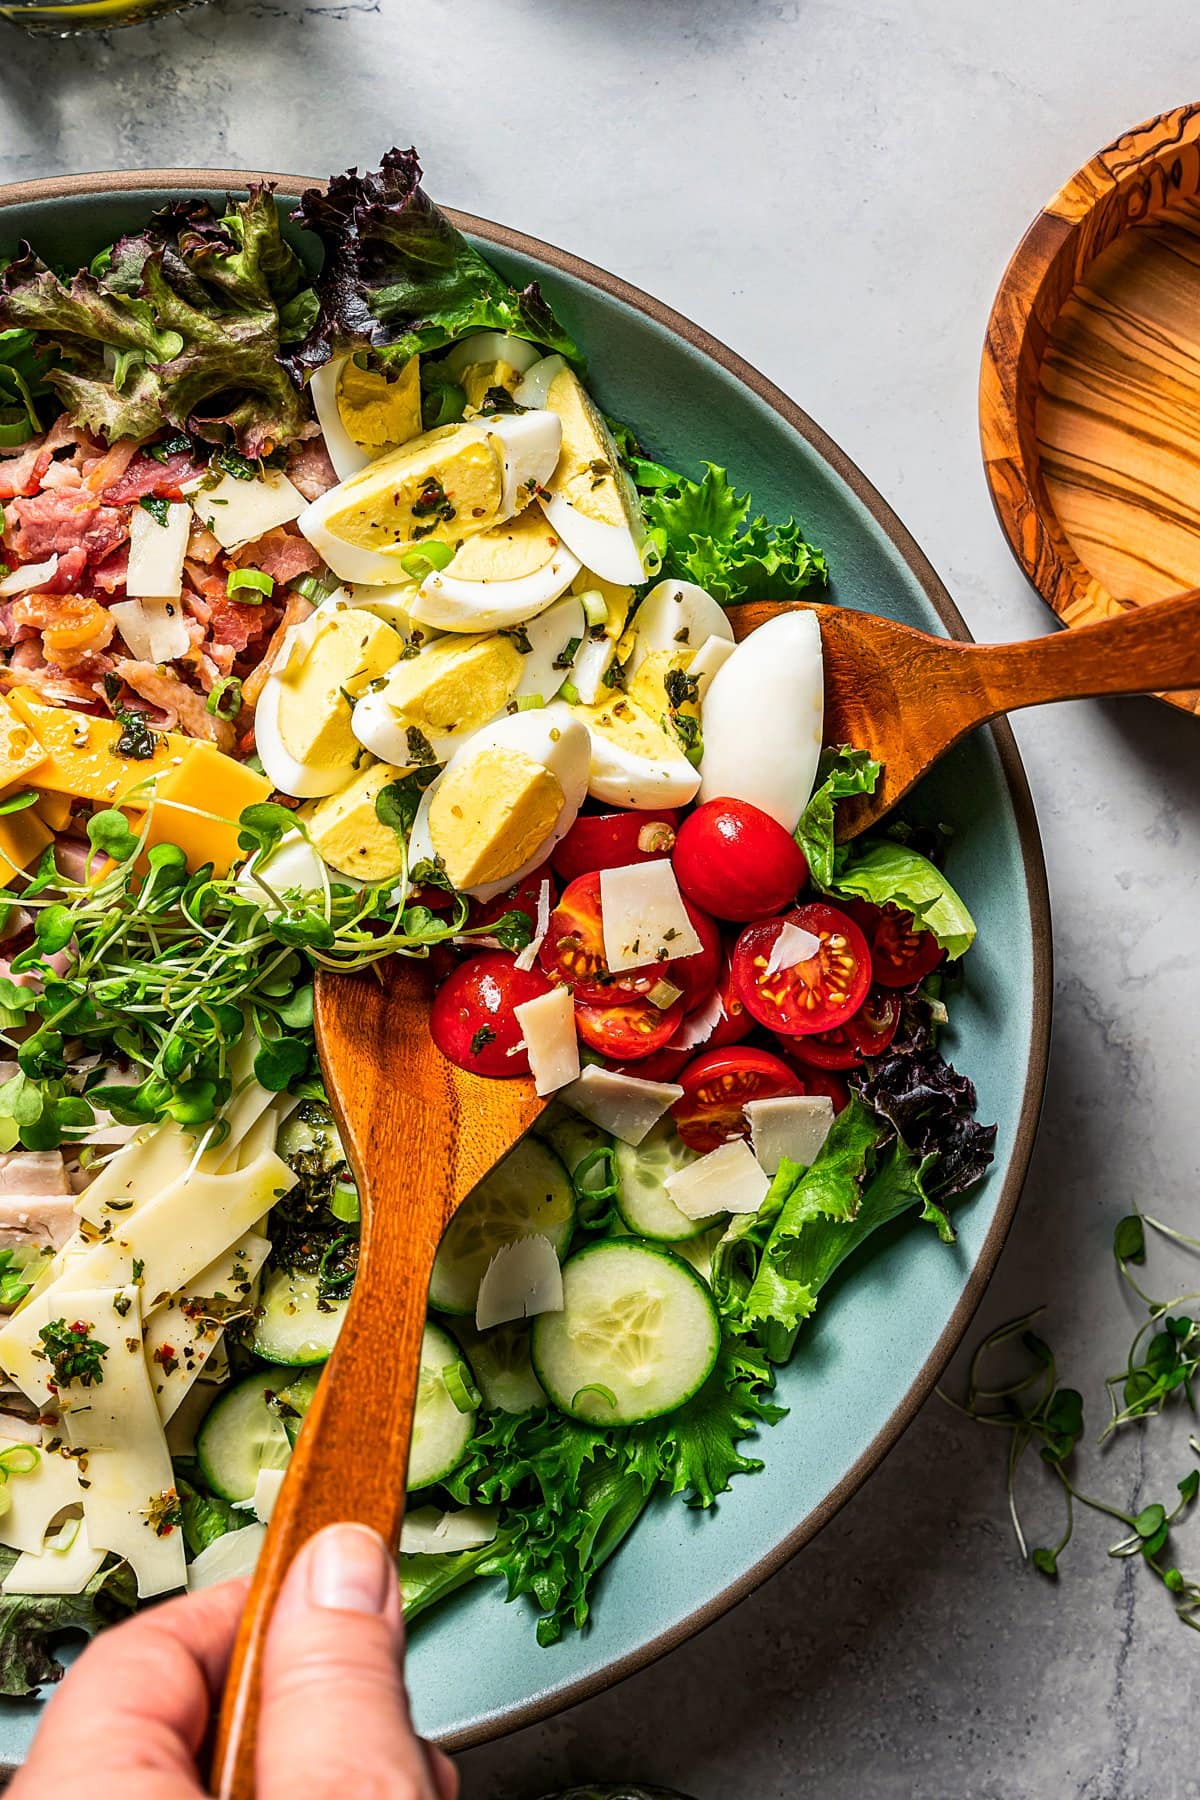 Hands use wooden tongs to toss a chef salad in a large bowl.